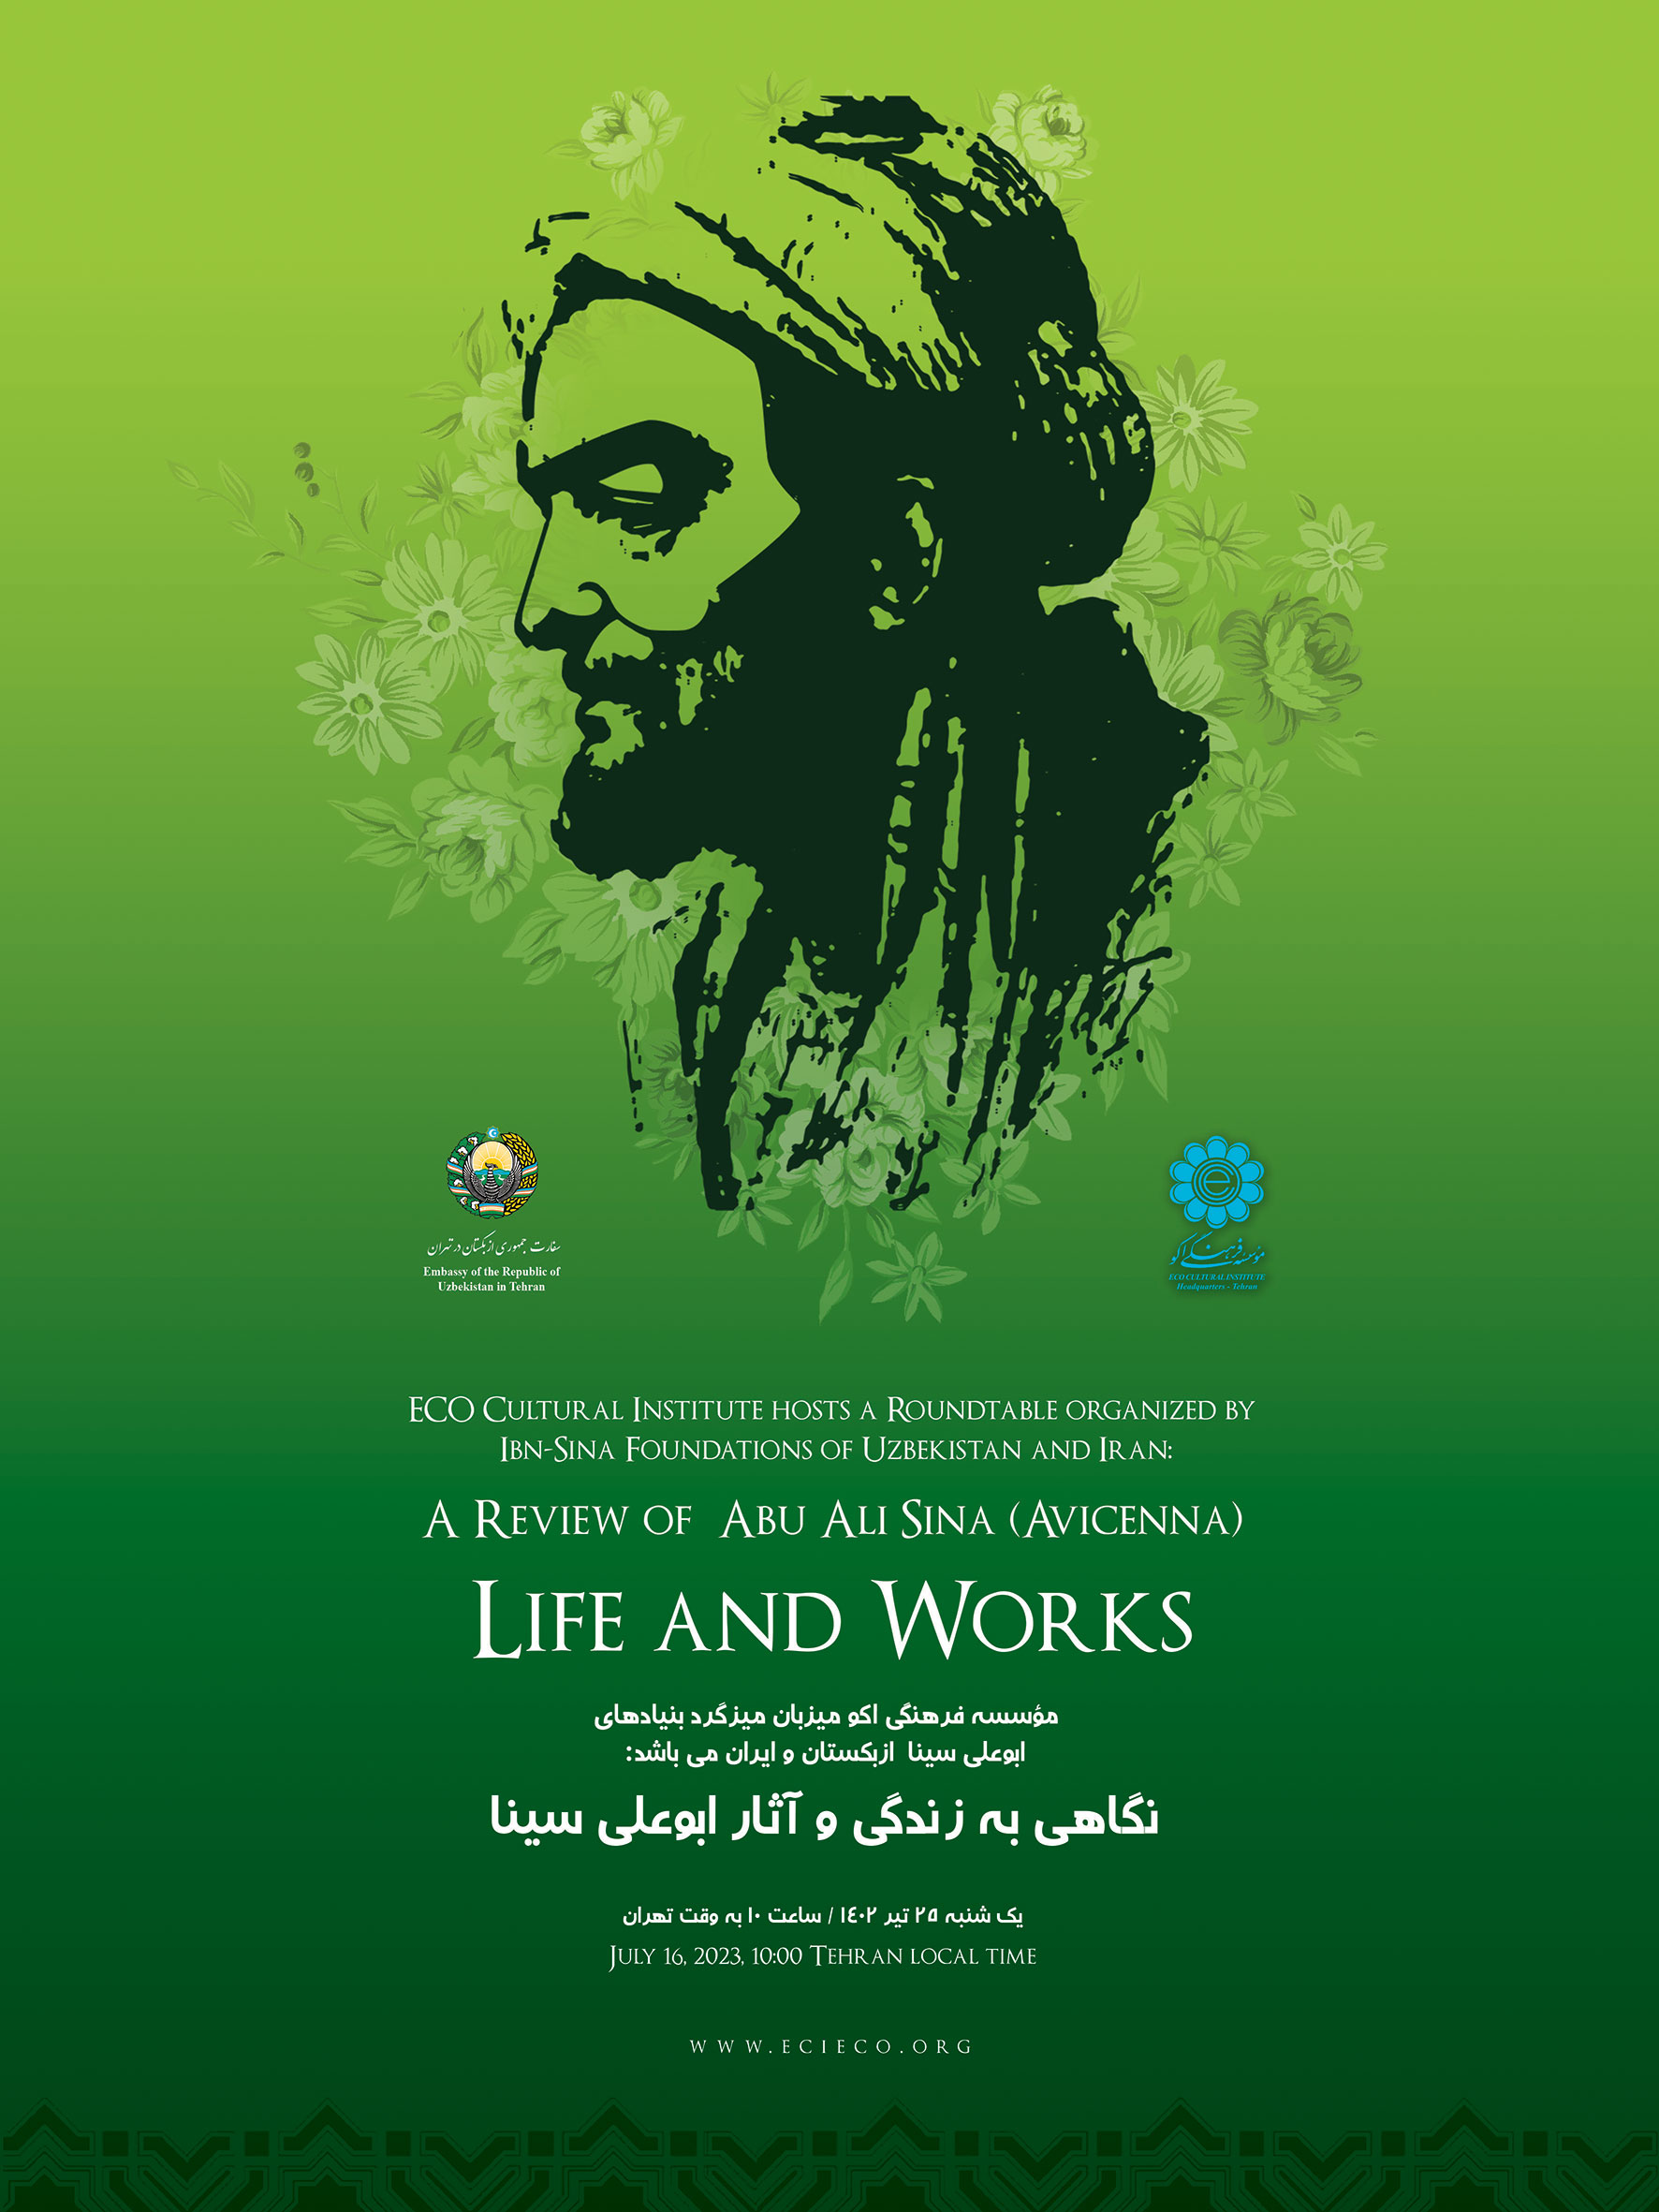 A Review of Abu Ali Sina (Avicenna) Life and Works